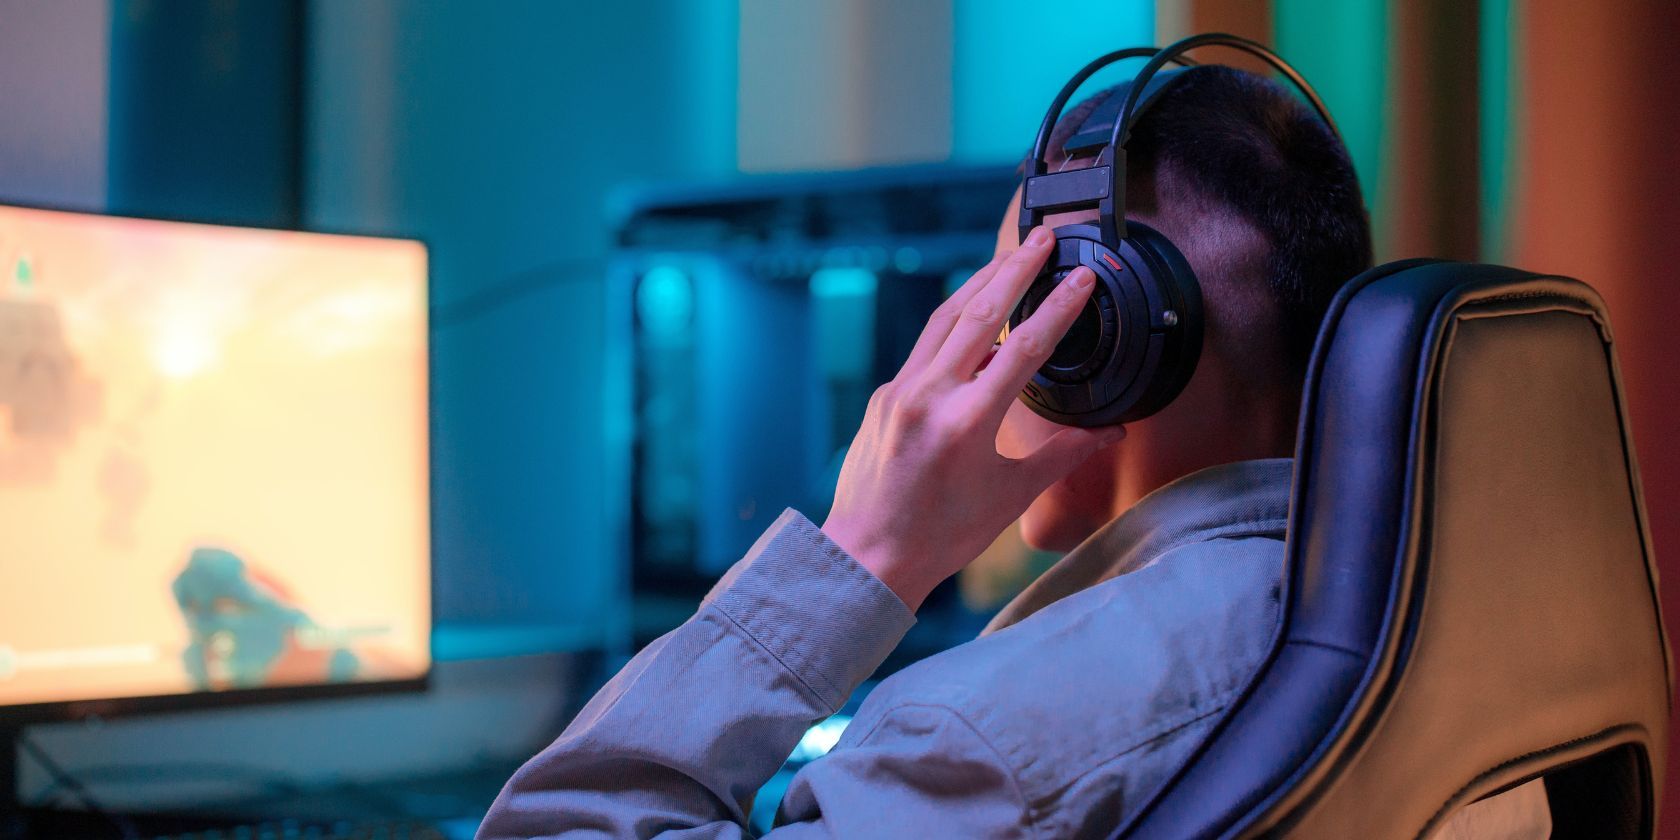 Person playing video games with voice chat through headset